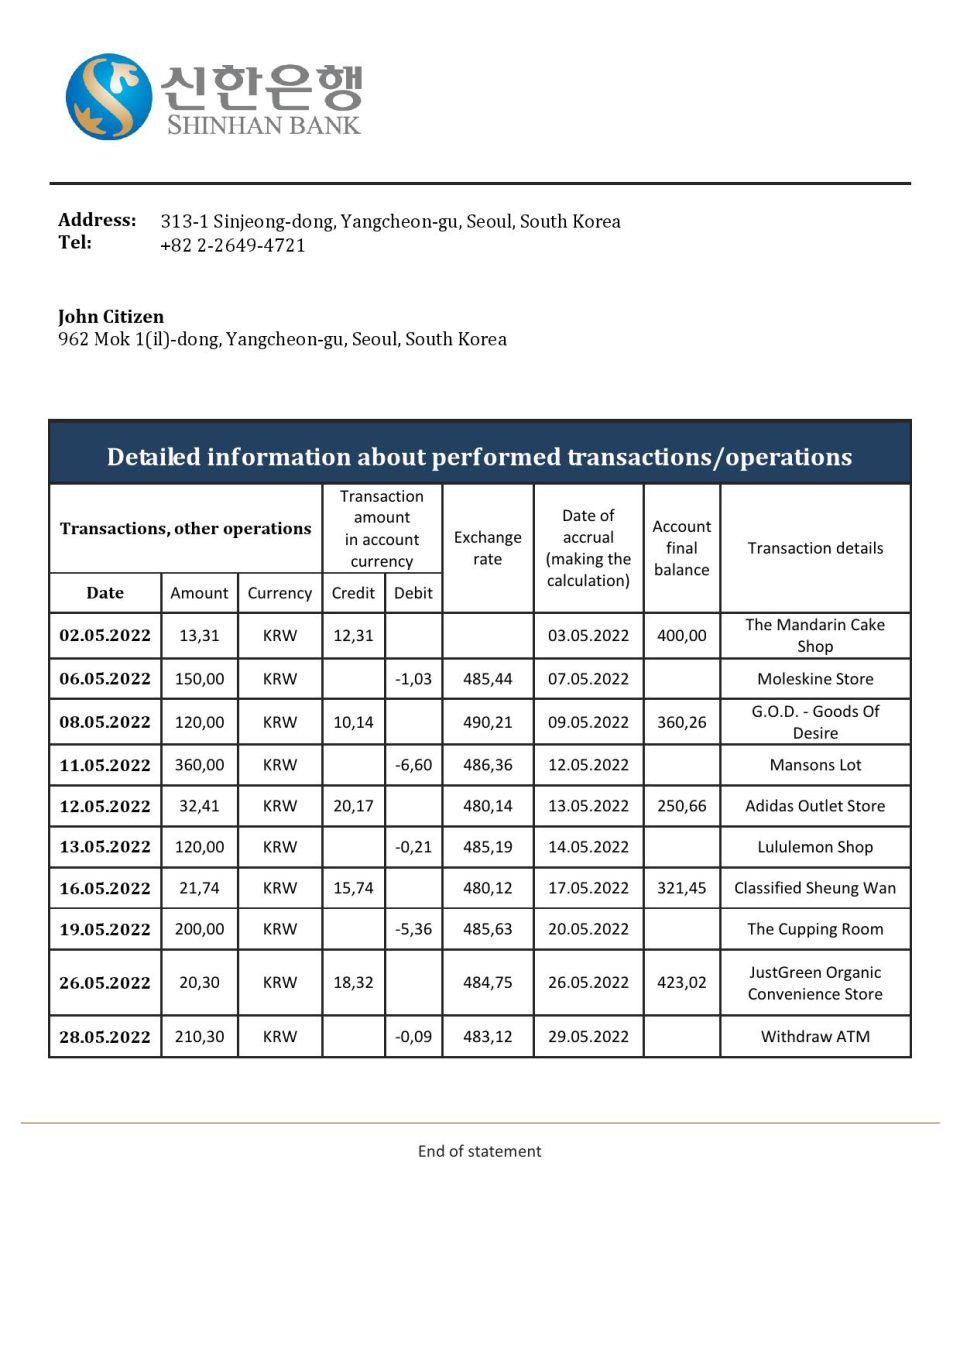 South Korea Shinhan bank statement template in Word and PDF format